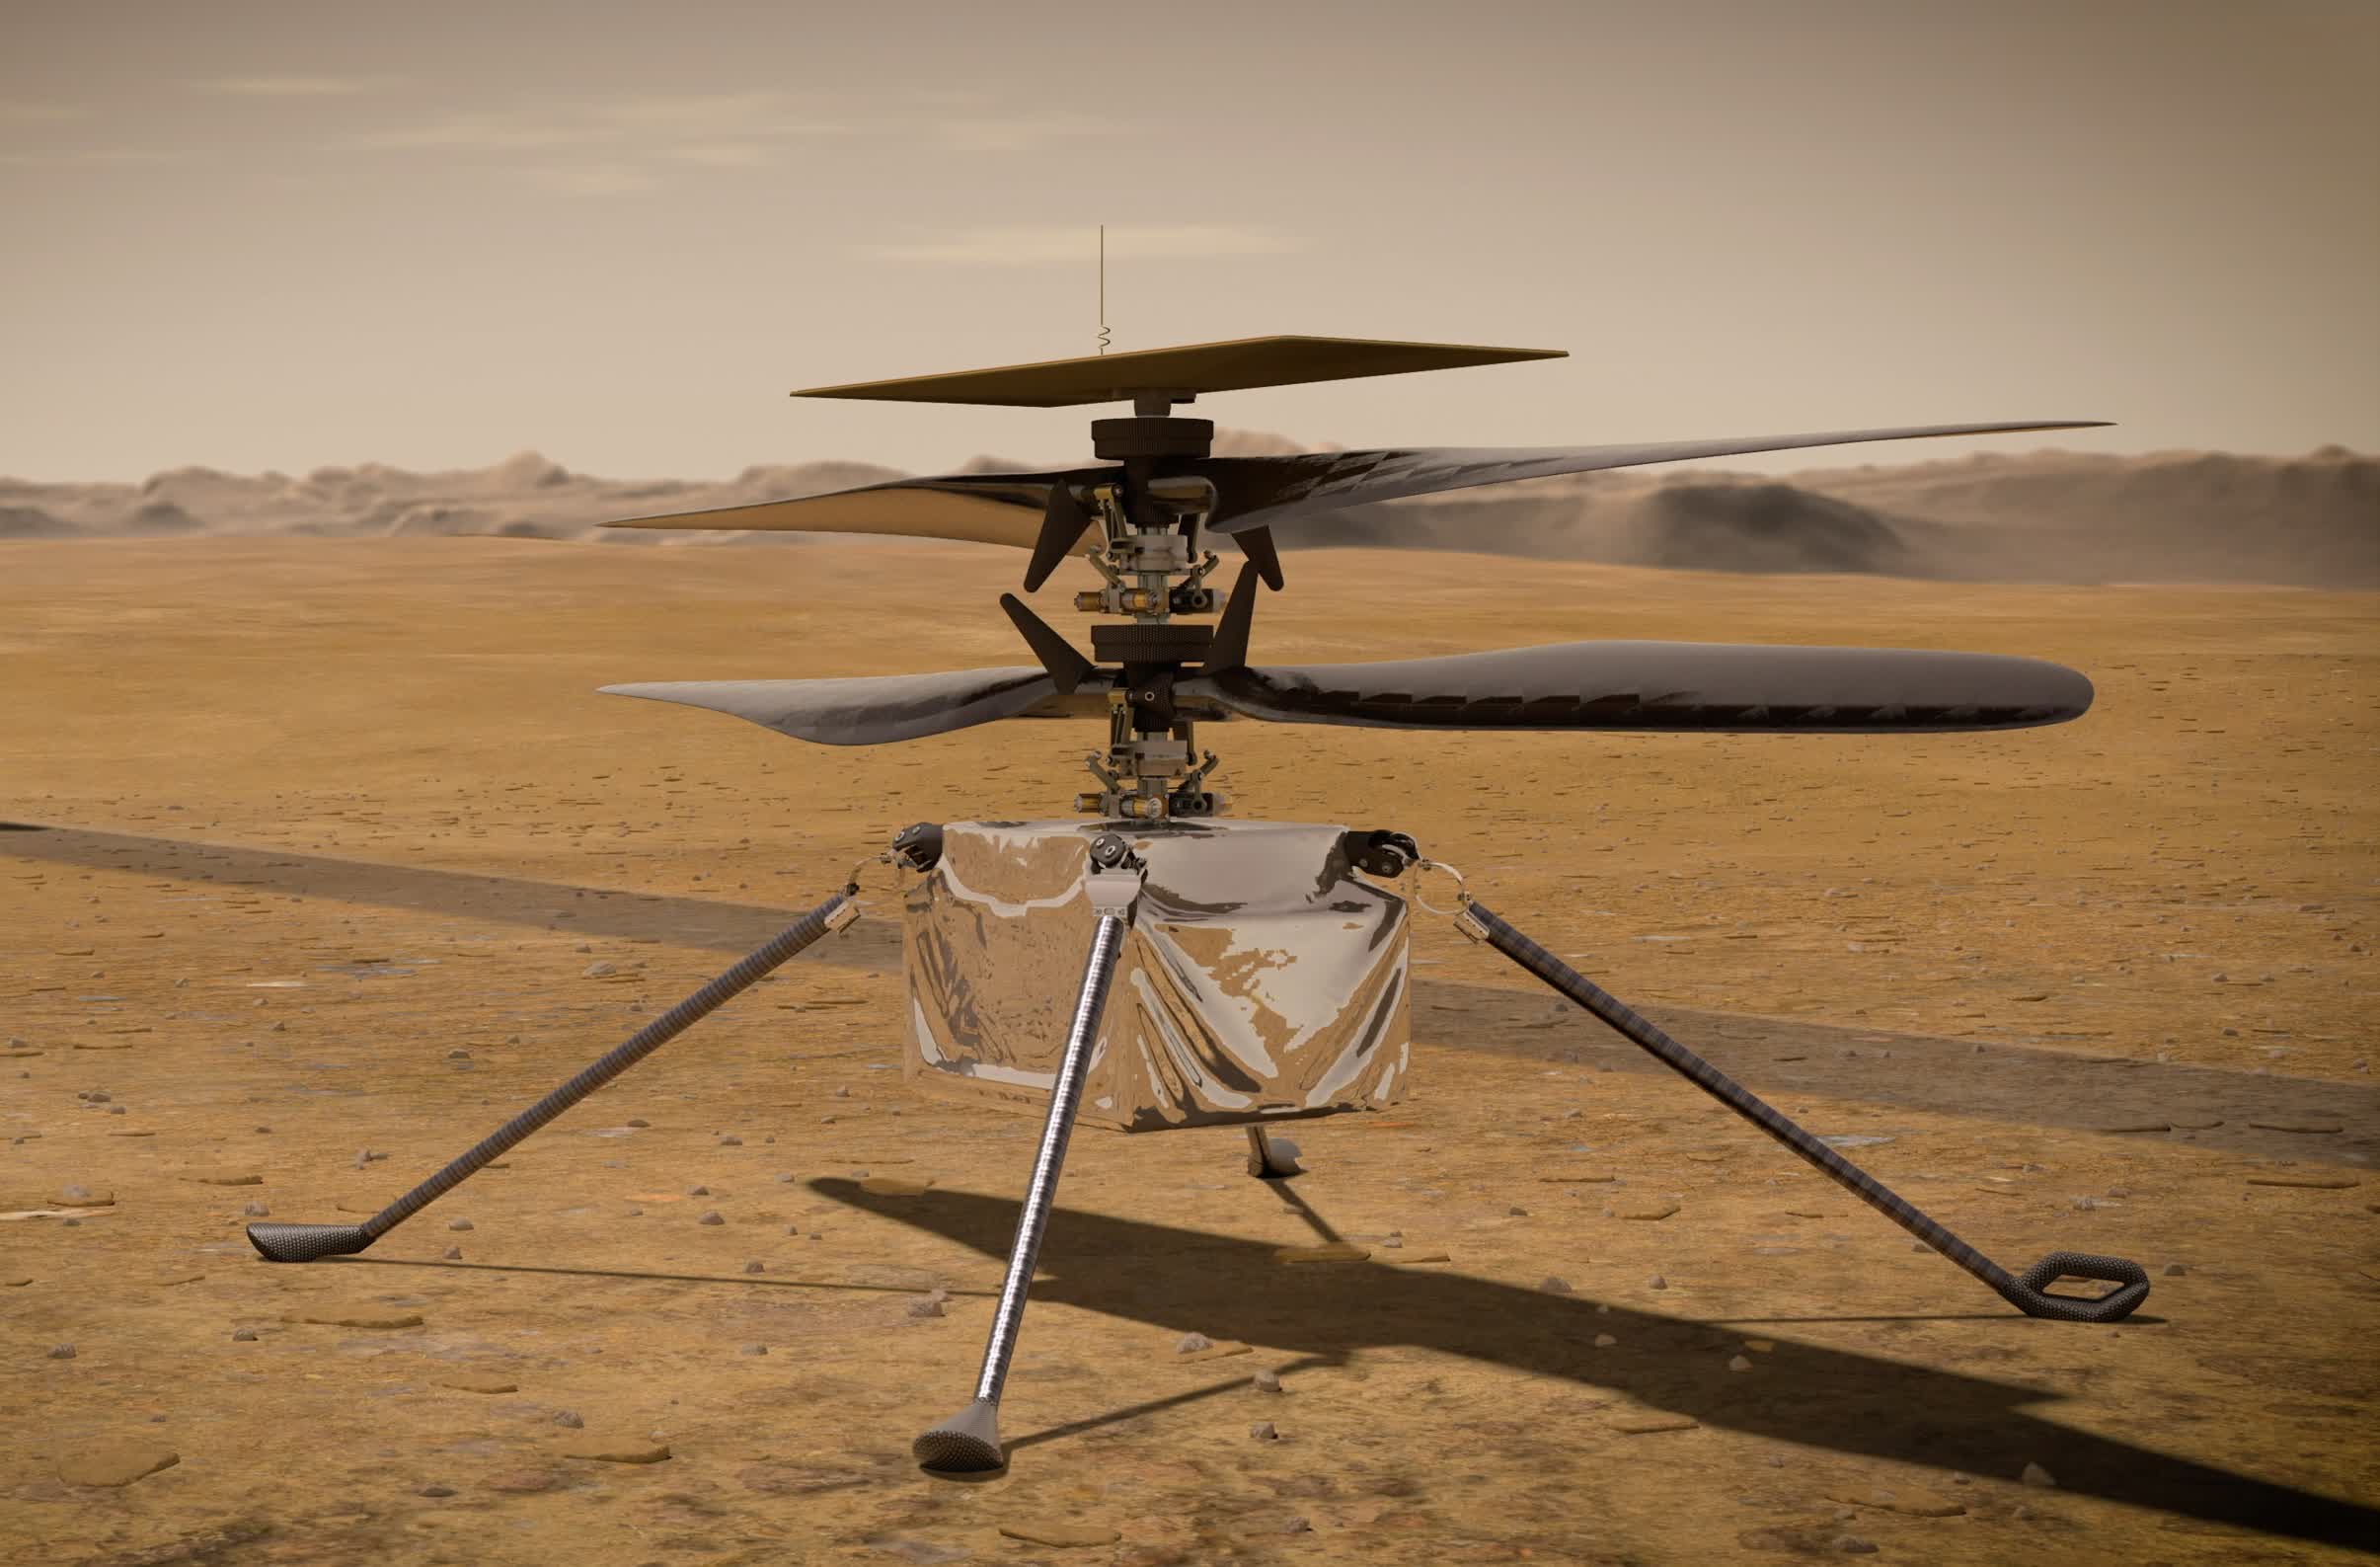 NASA extends Ingenuity Mars helicopter operations through September